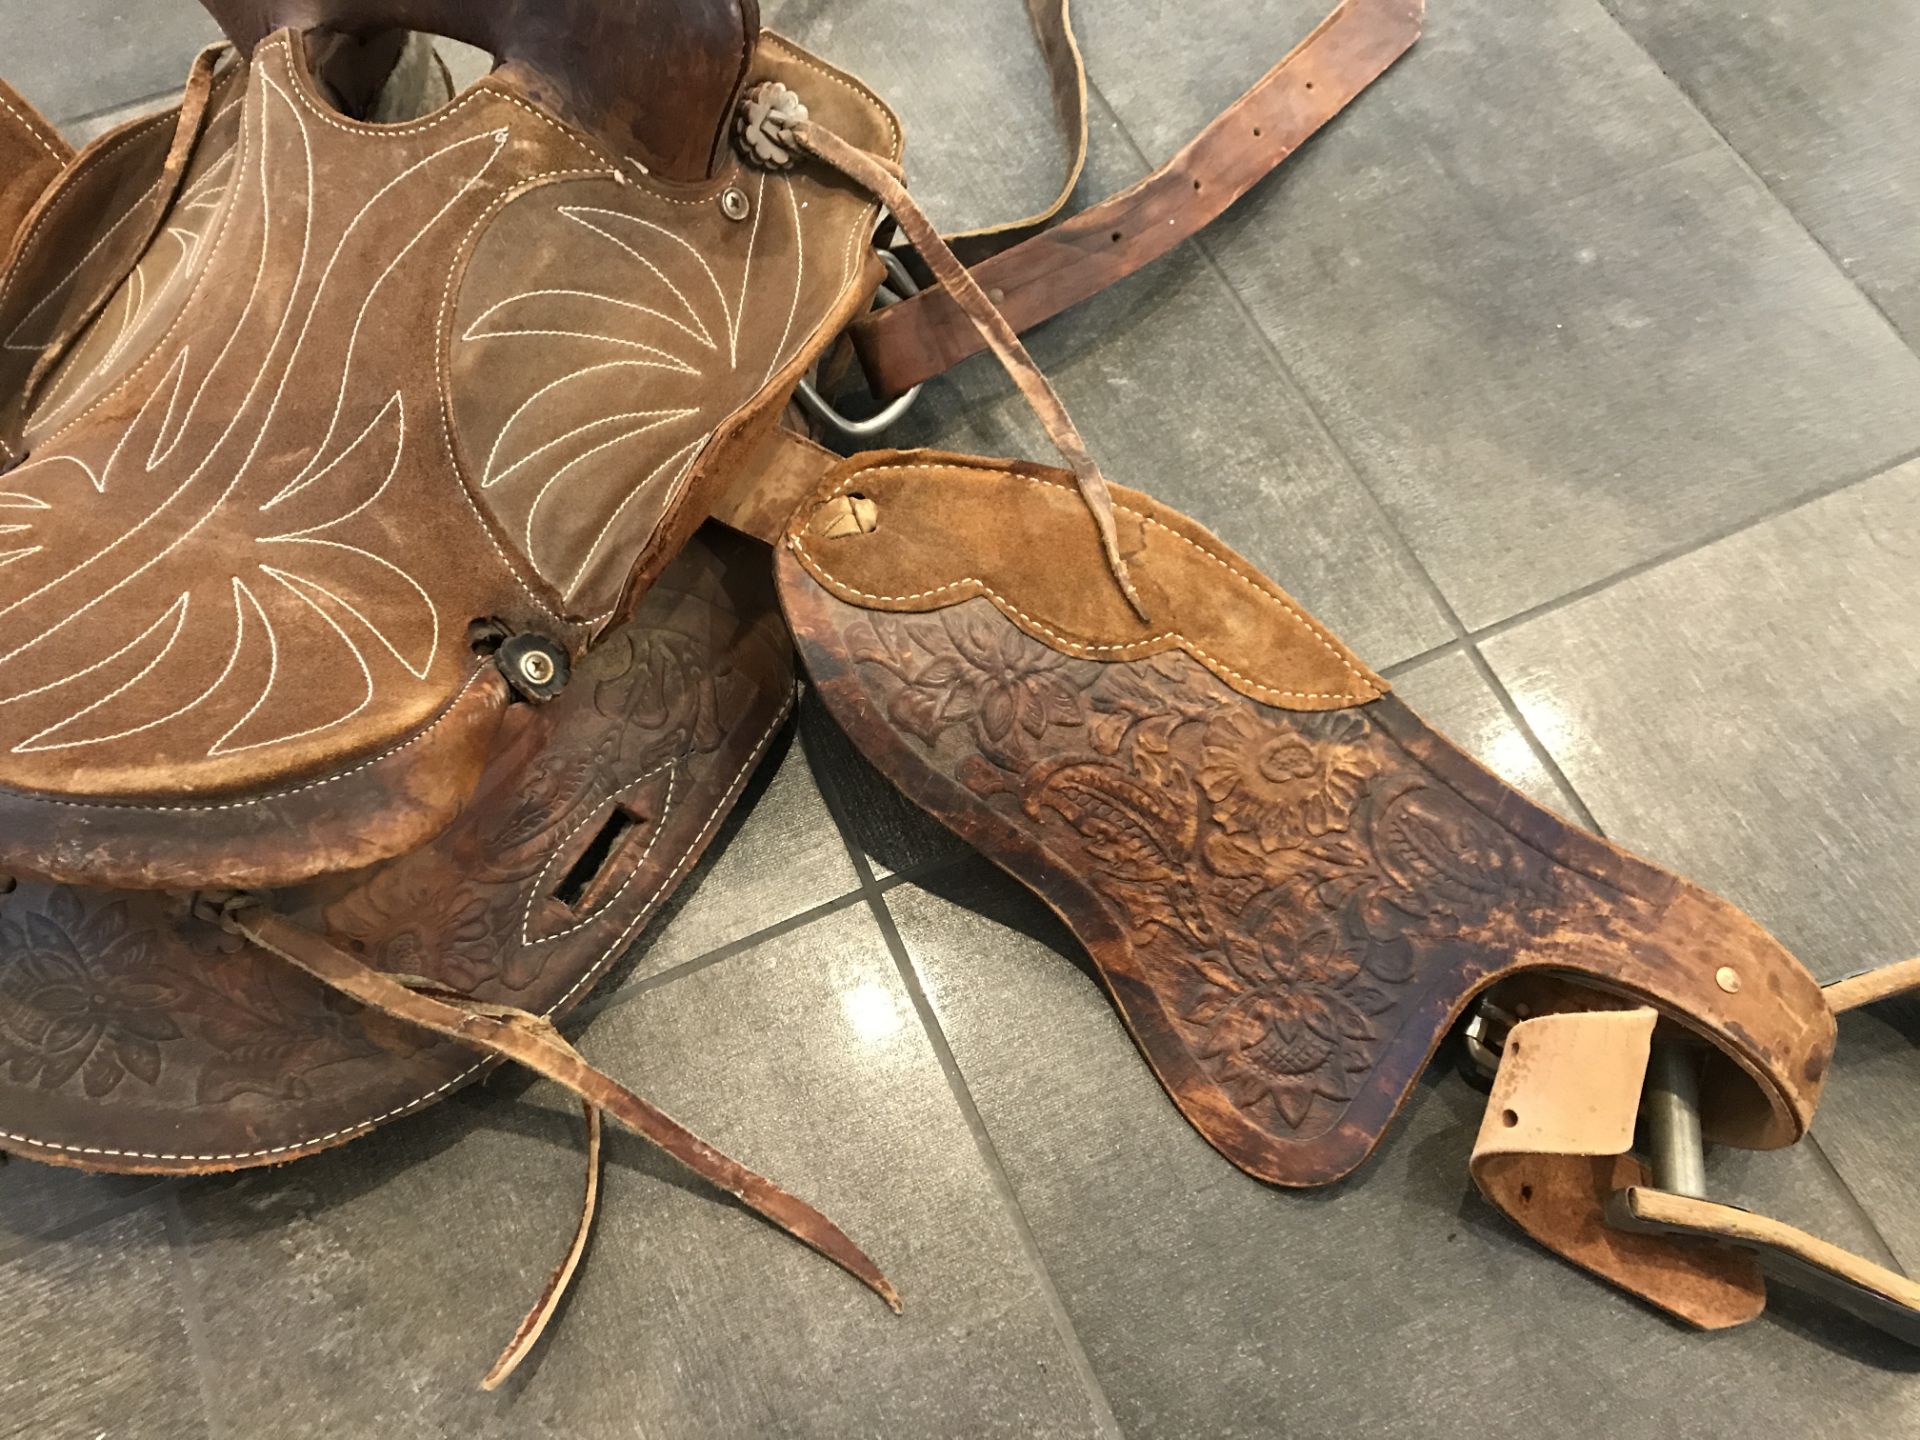 BROWN AUTHENTIC LEATHER HORSE SATTLE WITH INTRICATE DESIGN - Image 3 of 5